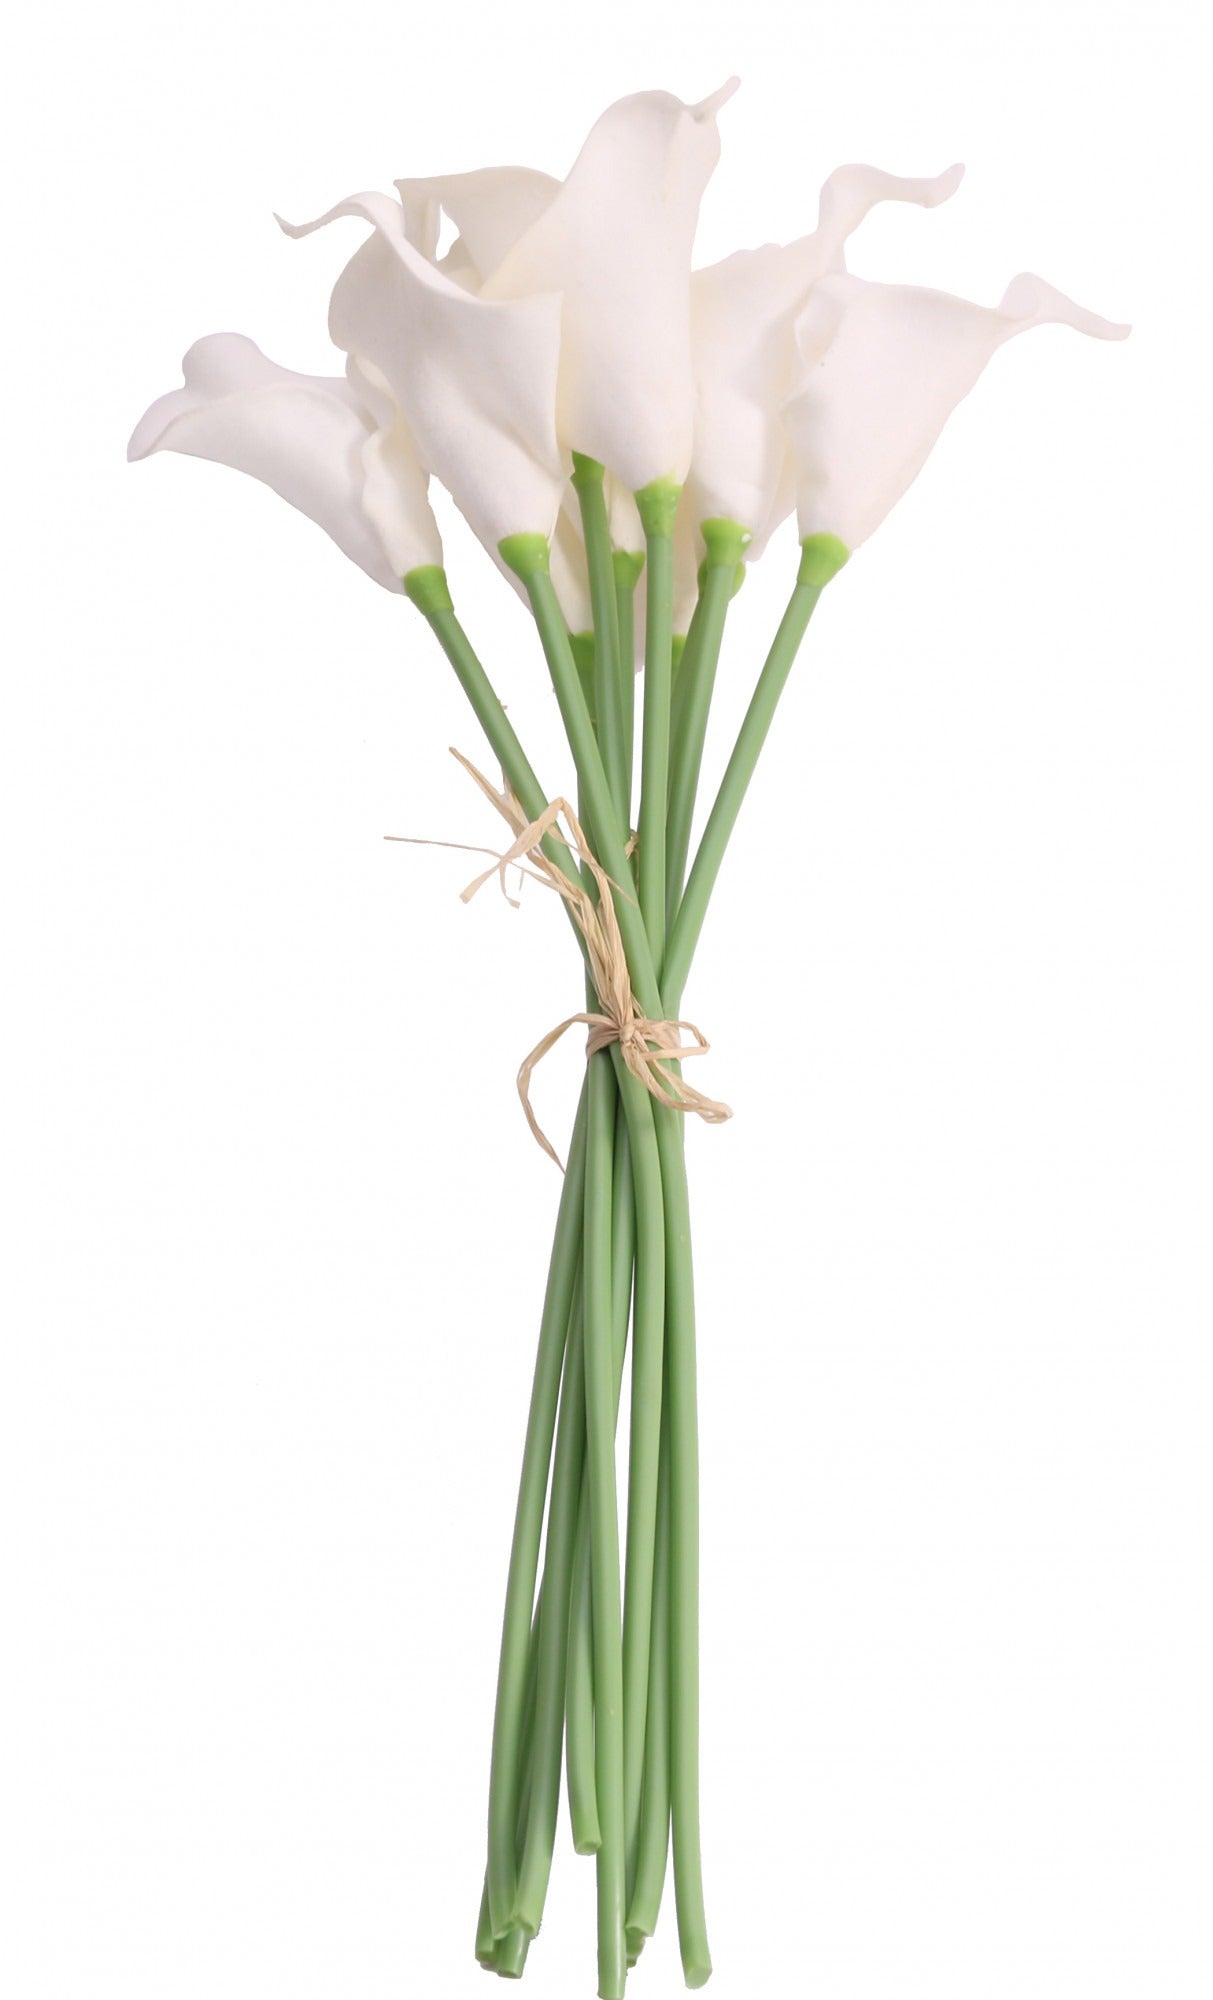 View Ivory Calla Lily information